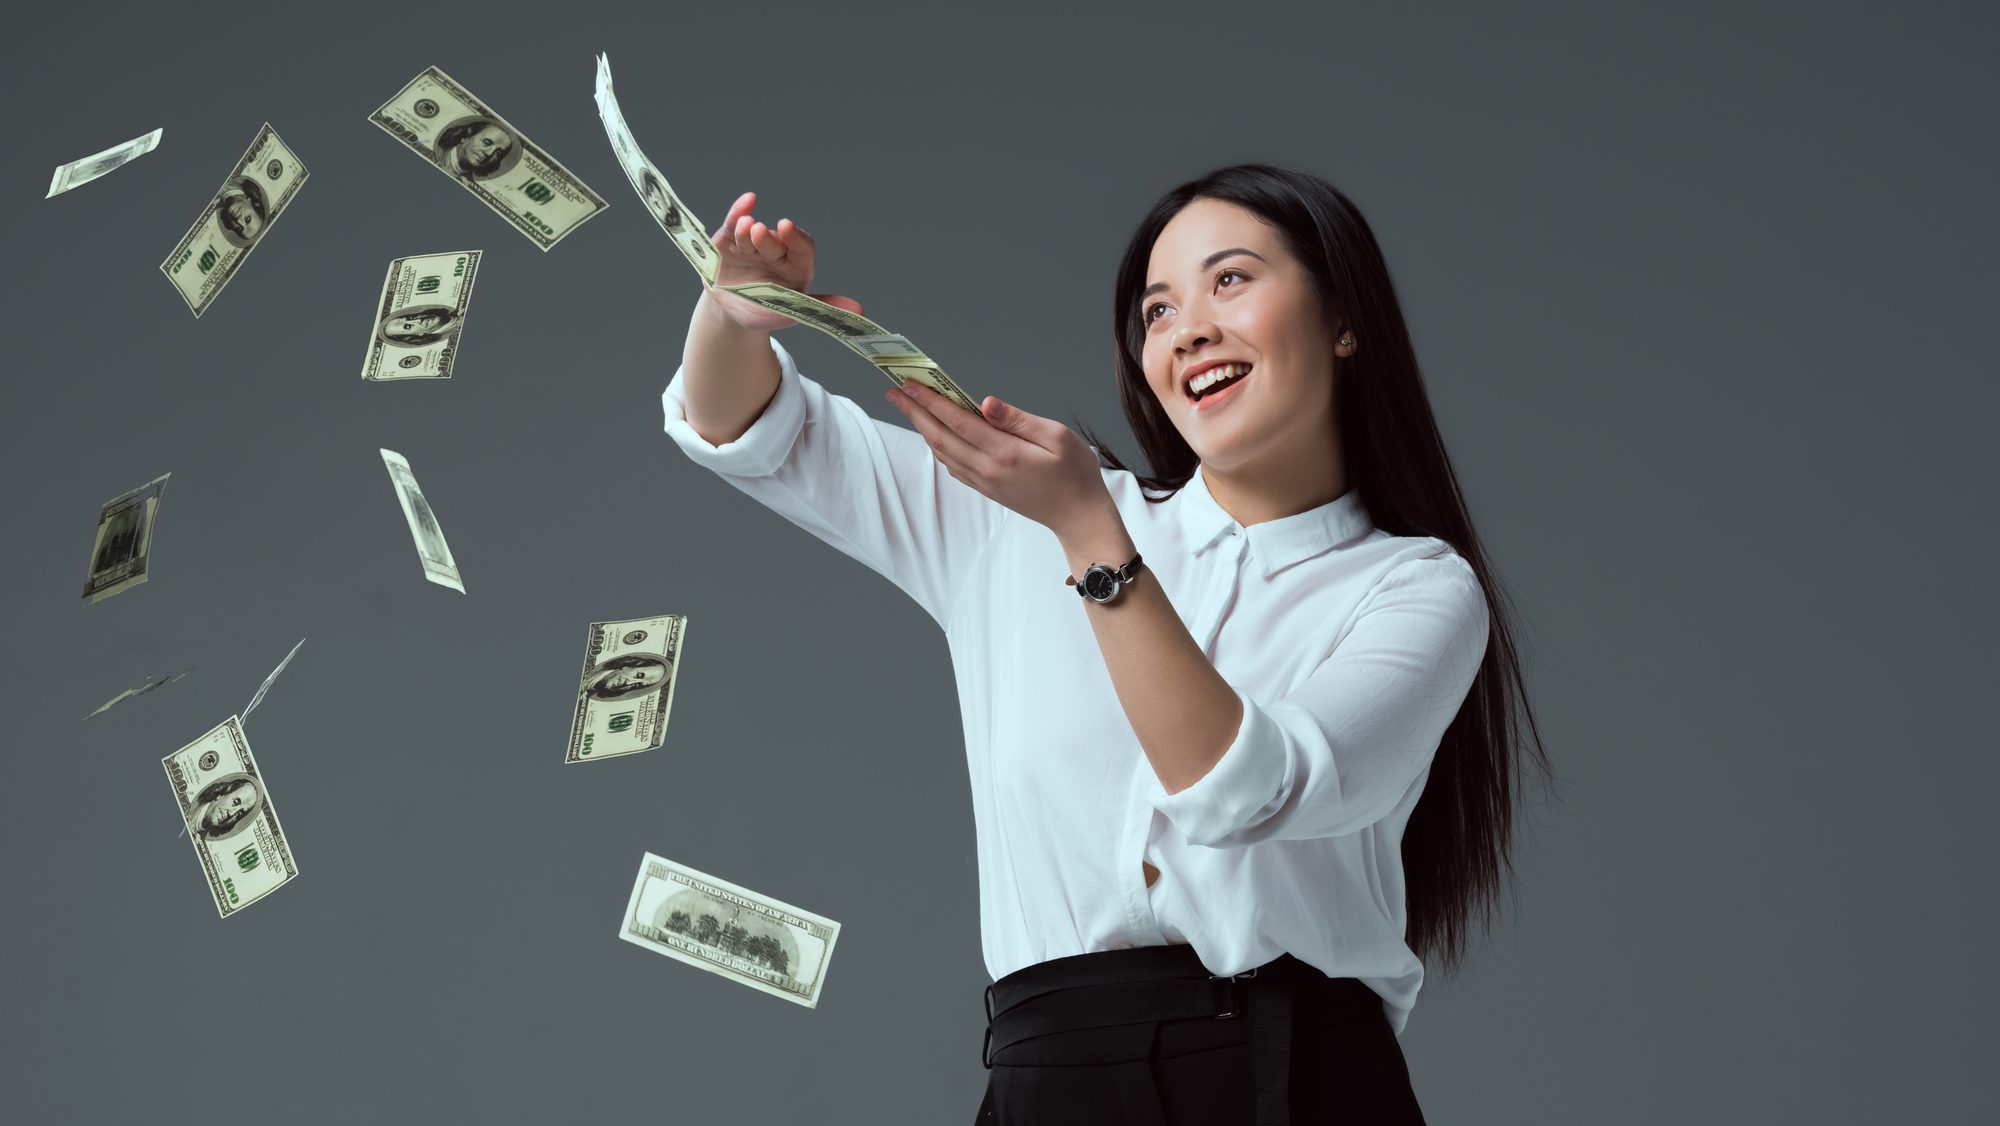 A woman smiling and money in the air.